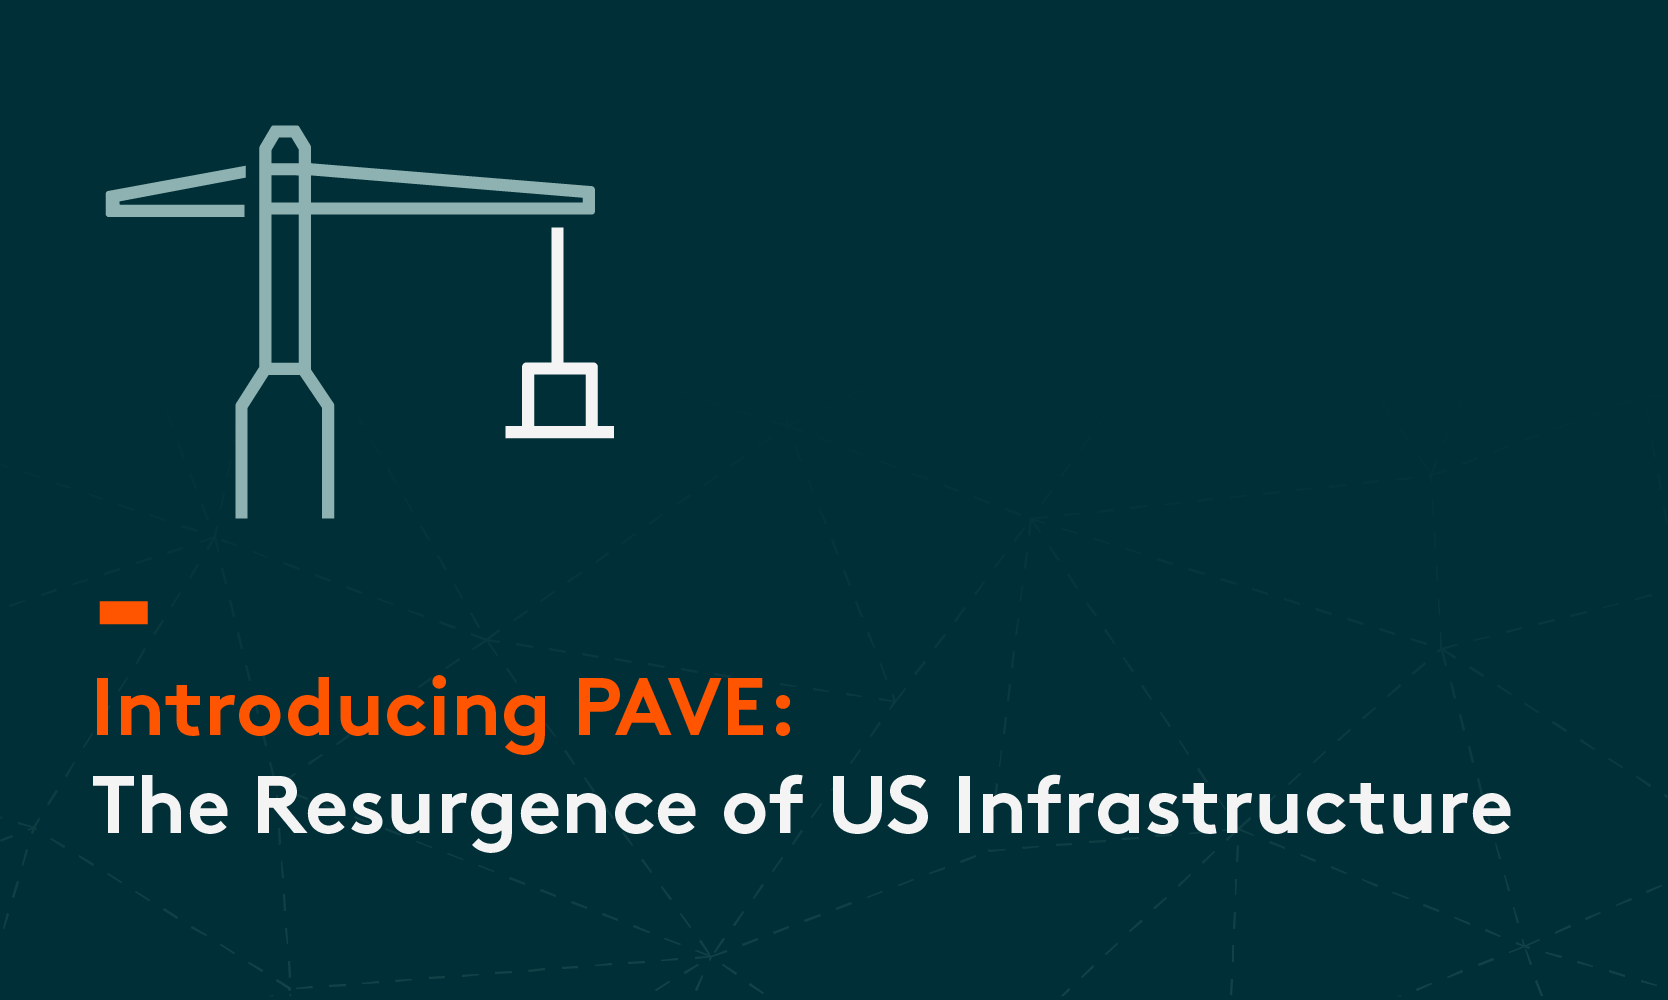 Introducing PAVE: The Resurgence of US Infrastructure